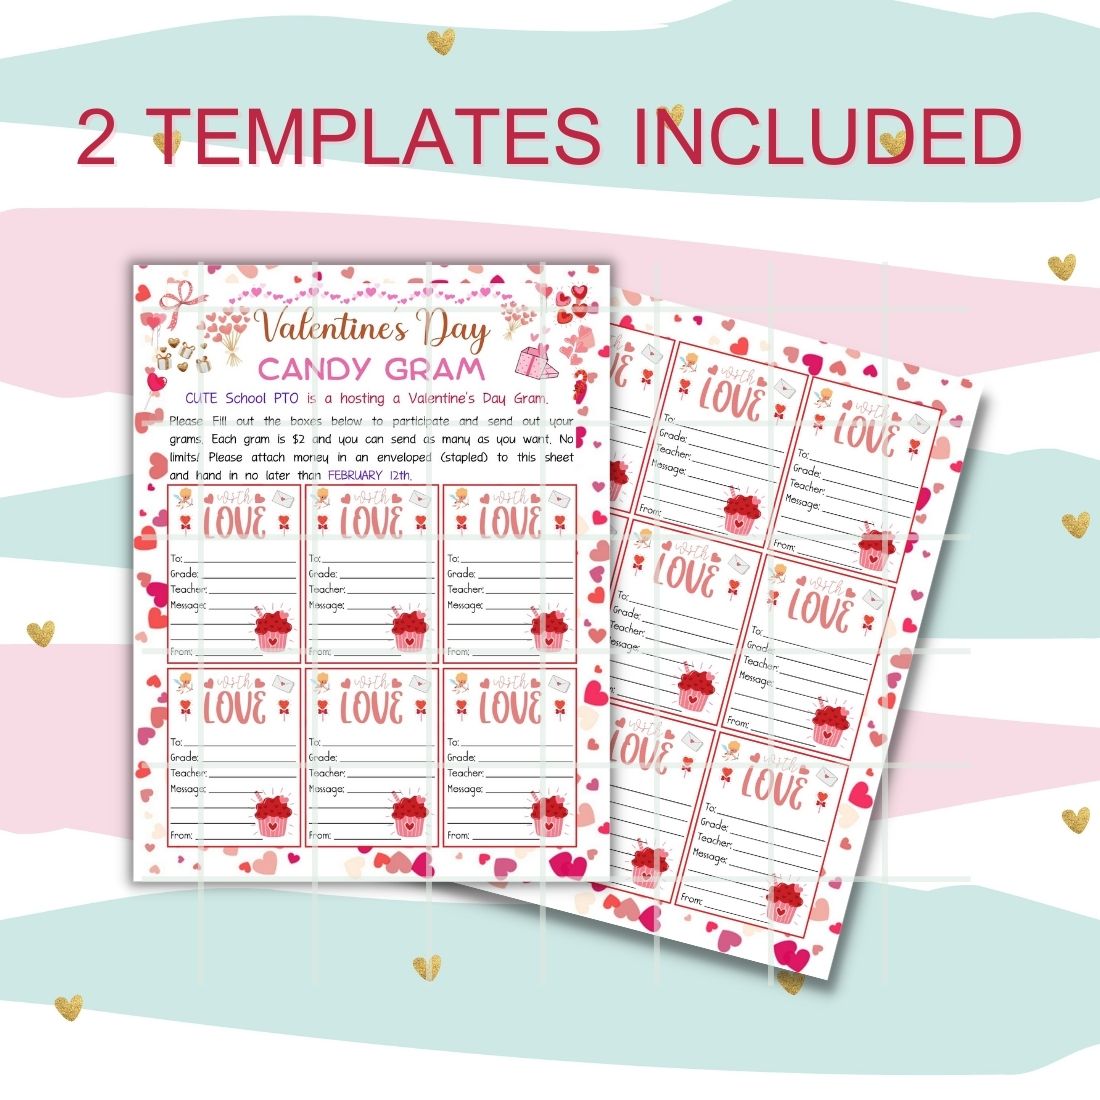 Valentines Candy Gram - Editable by Canva cover image.